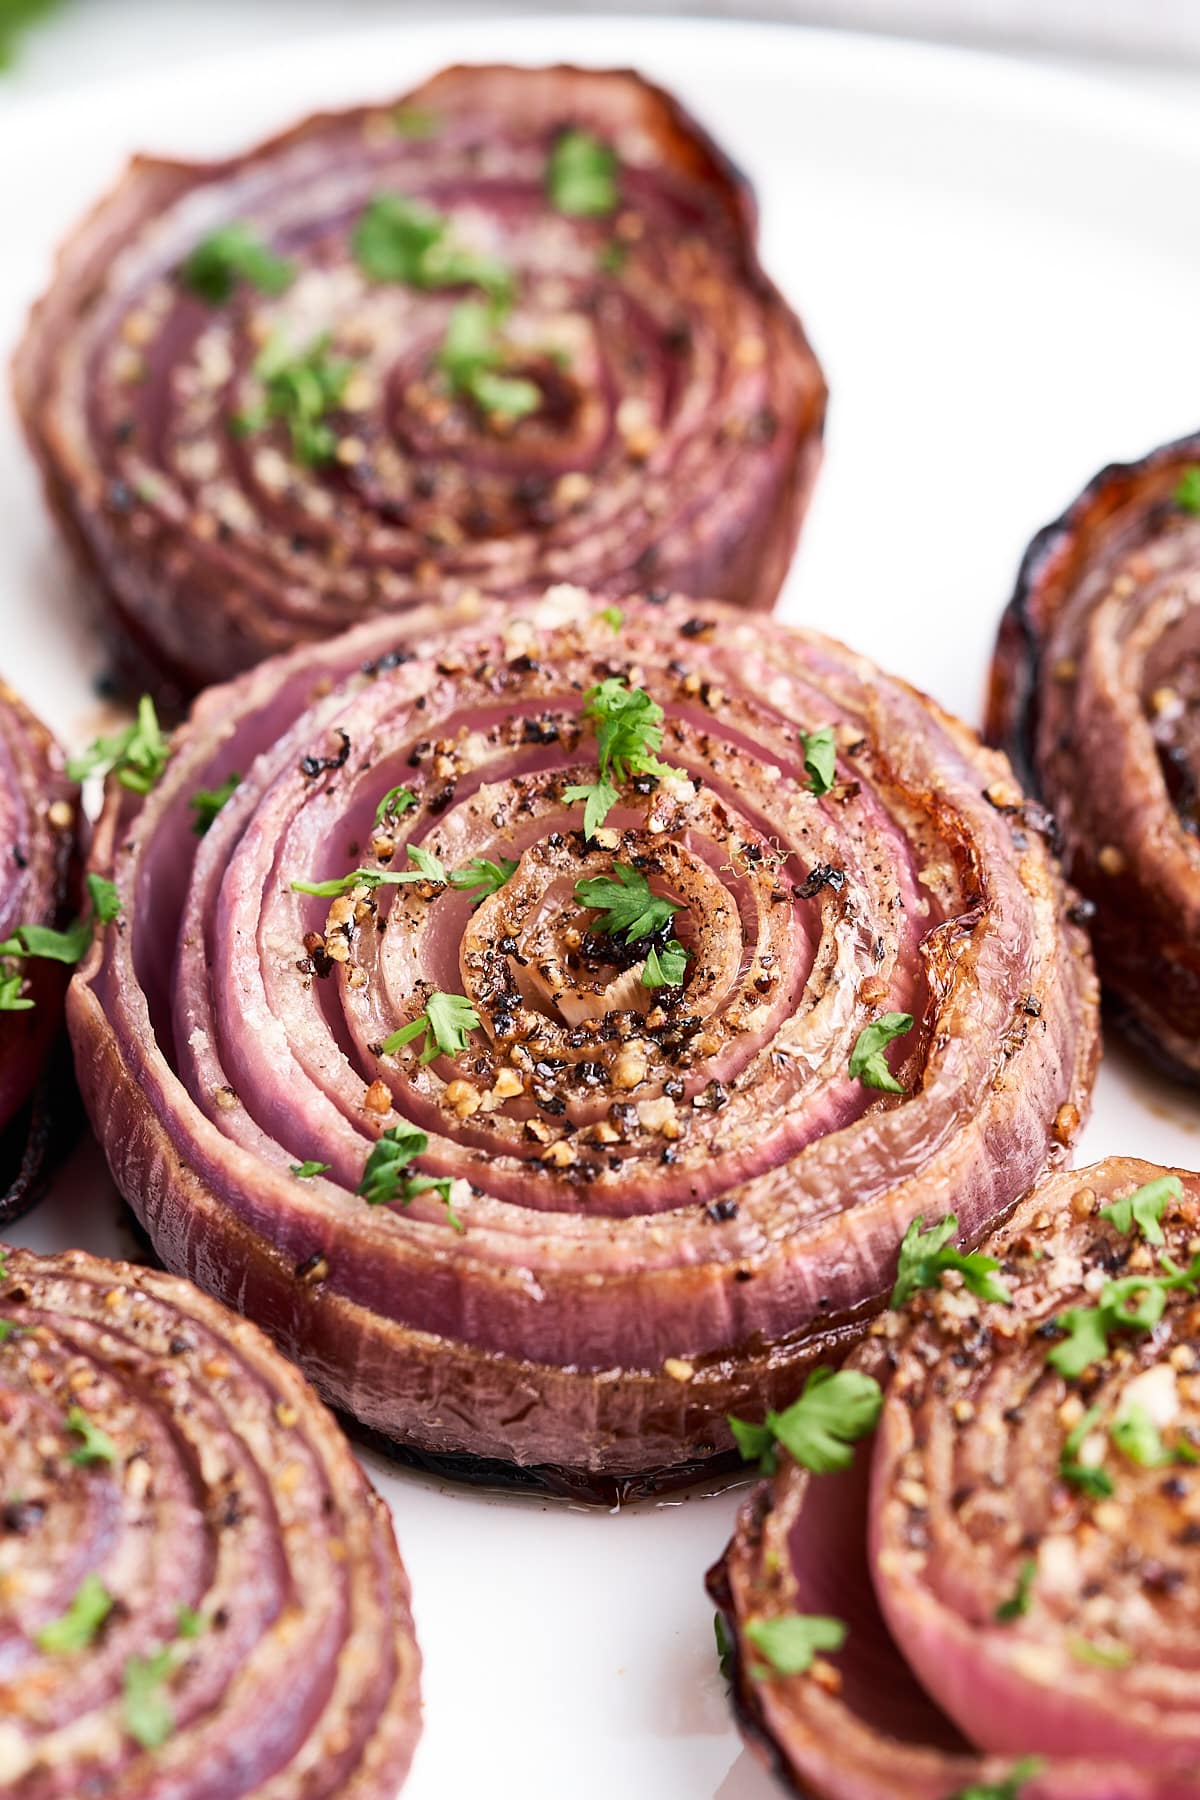 Baked onions.